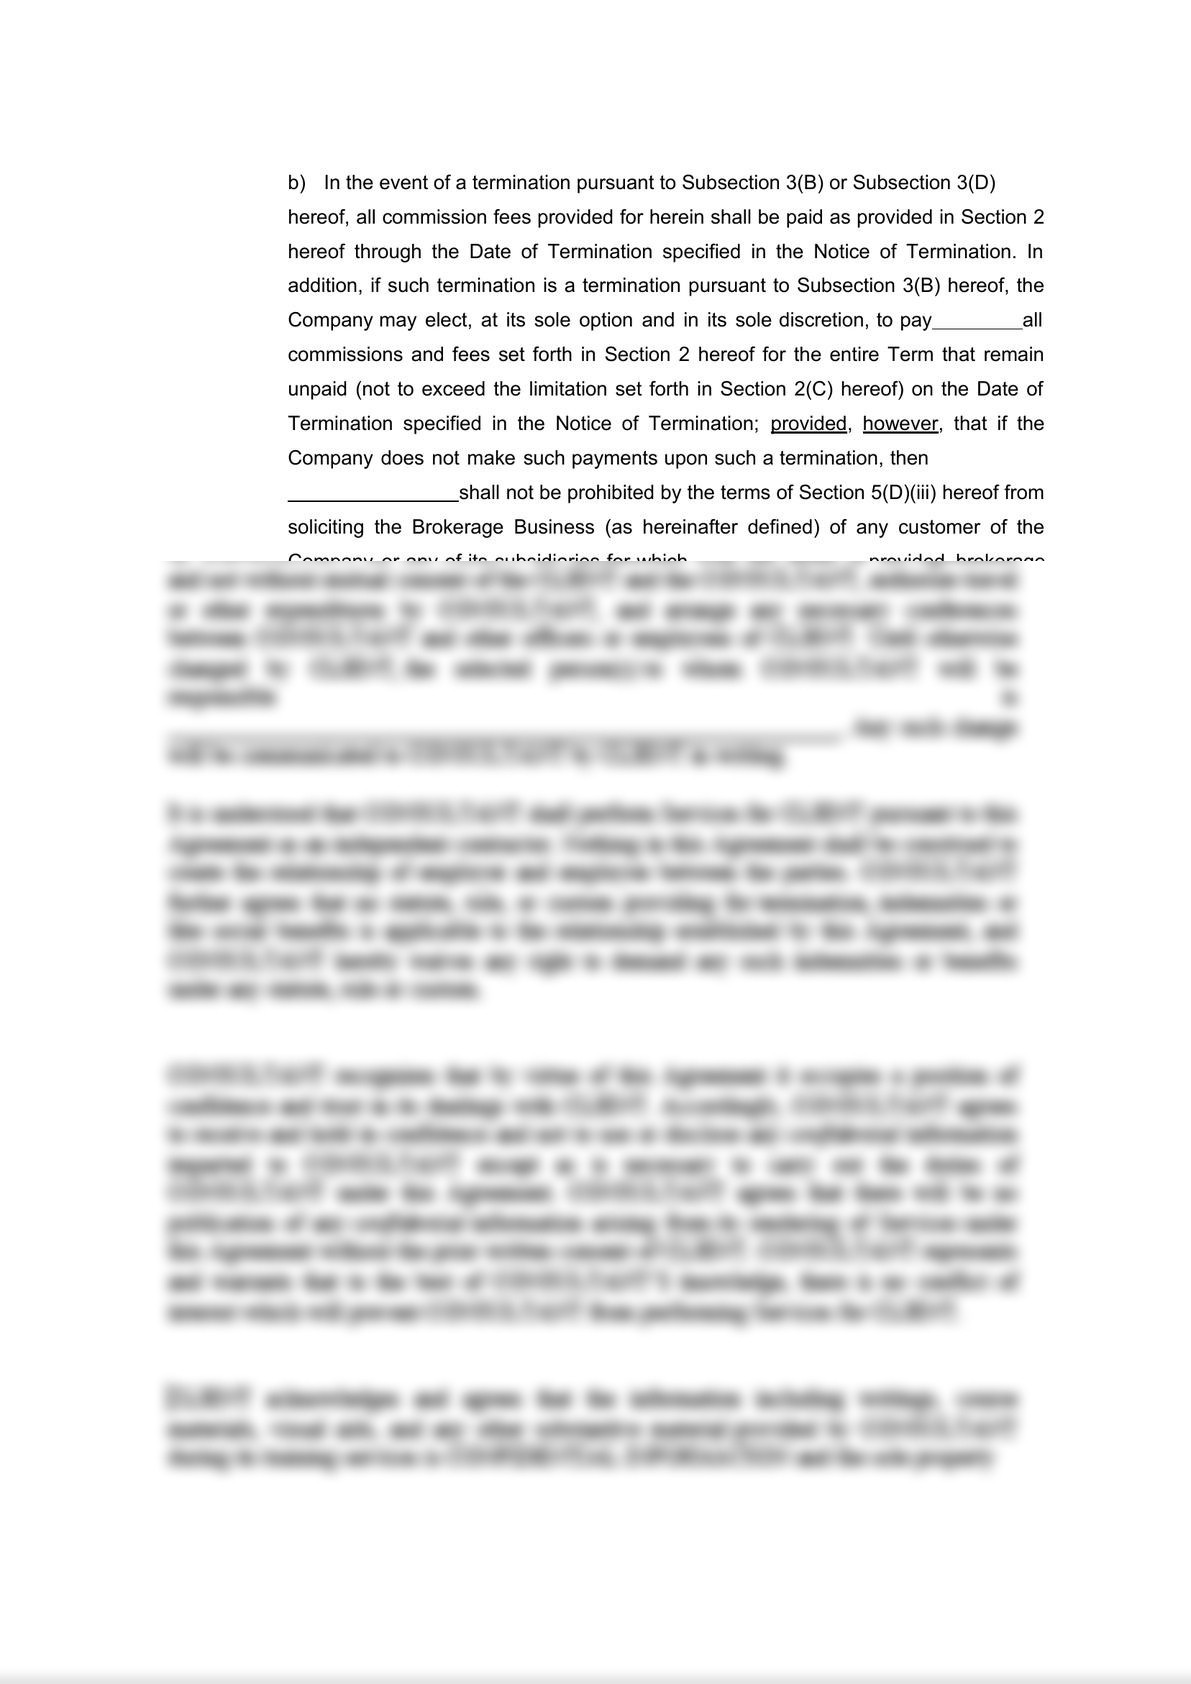 General Commission Agreement-4